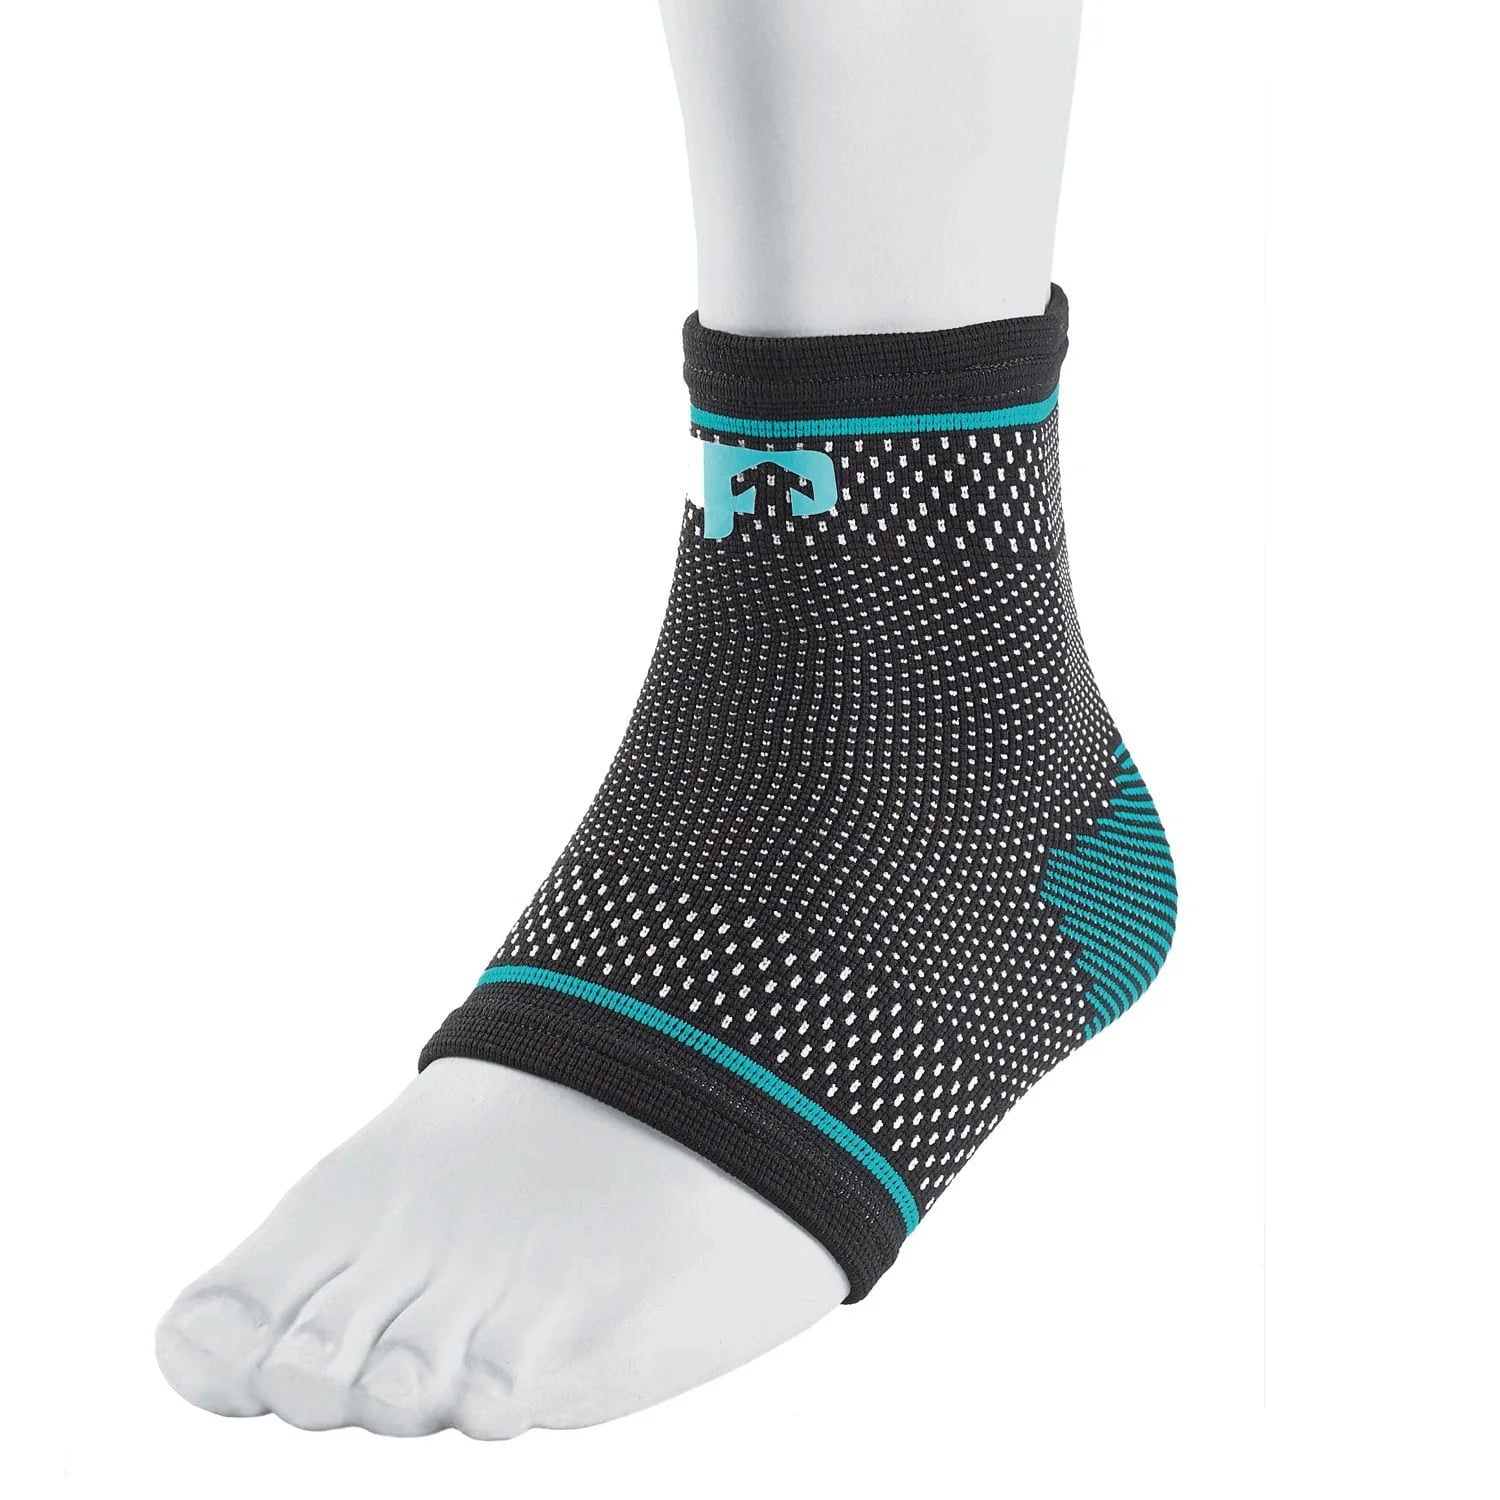 Ankle Supports & Braces  Ultimate Performance Sport - 1000 Mile